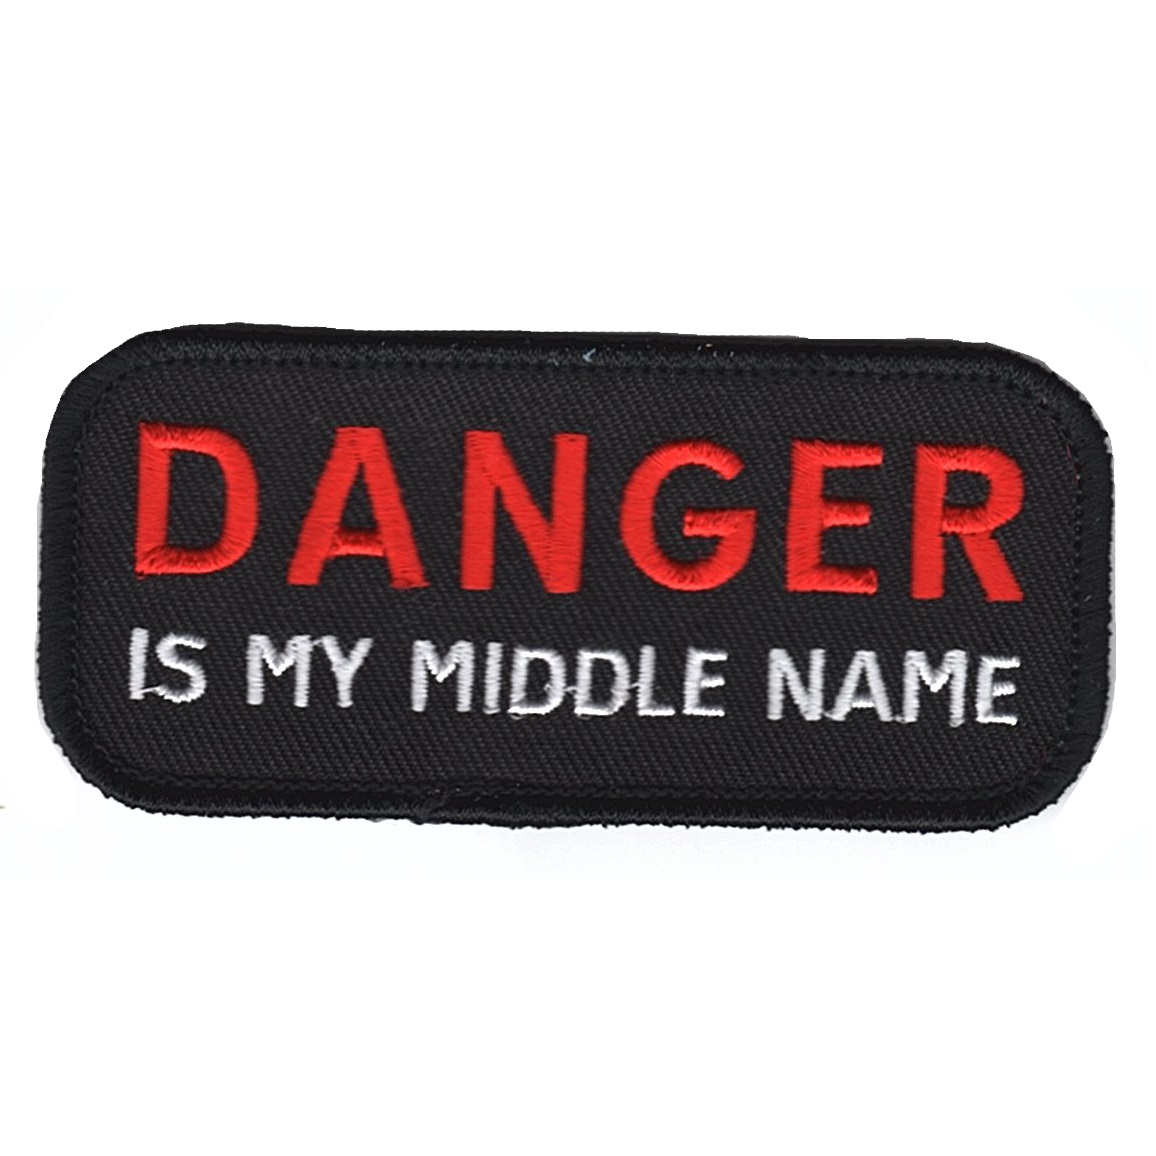 Danger is my middle name